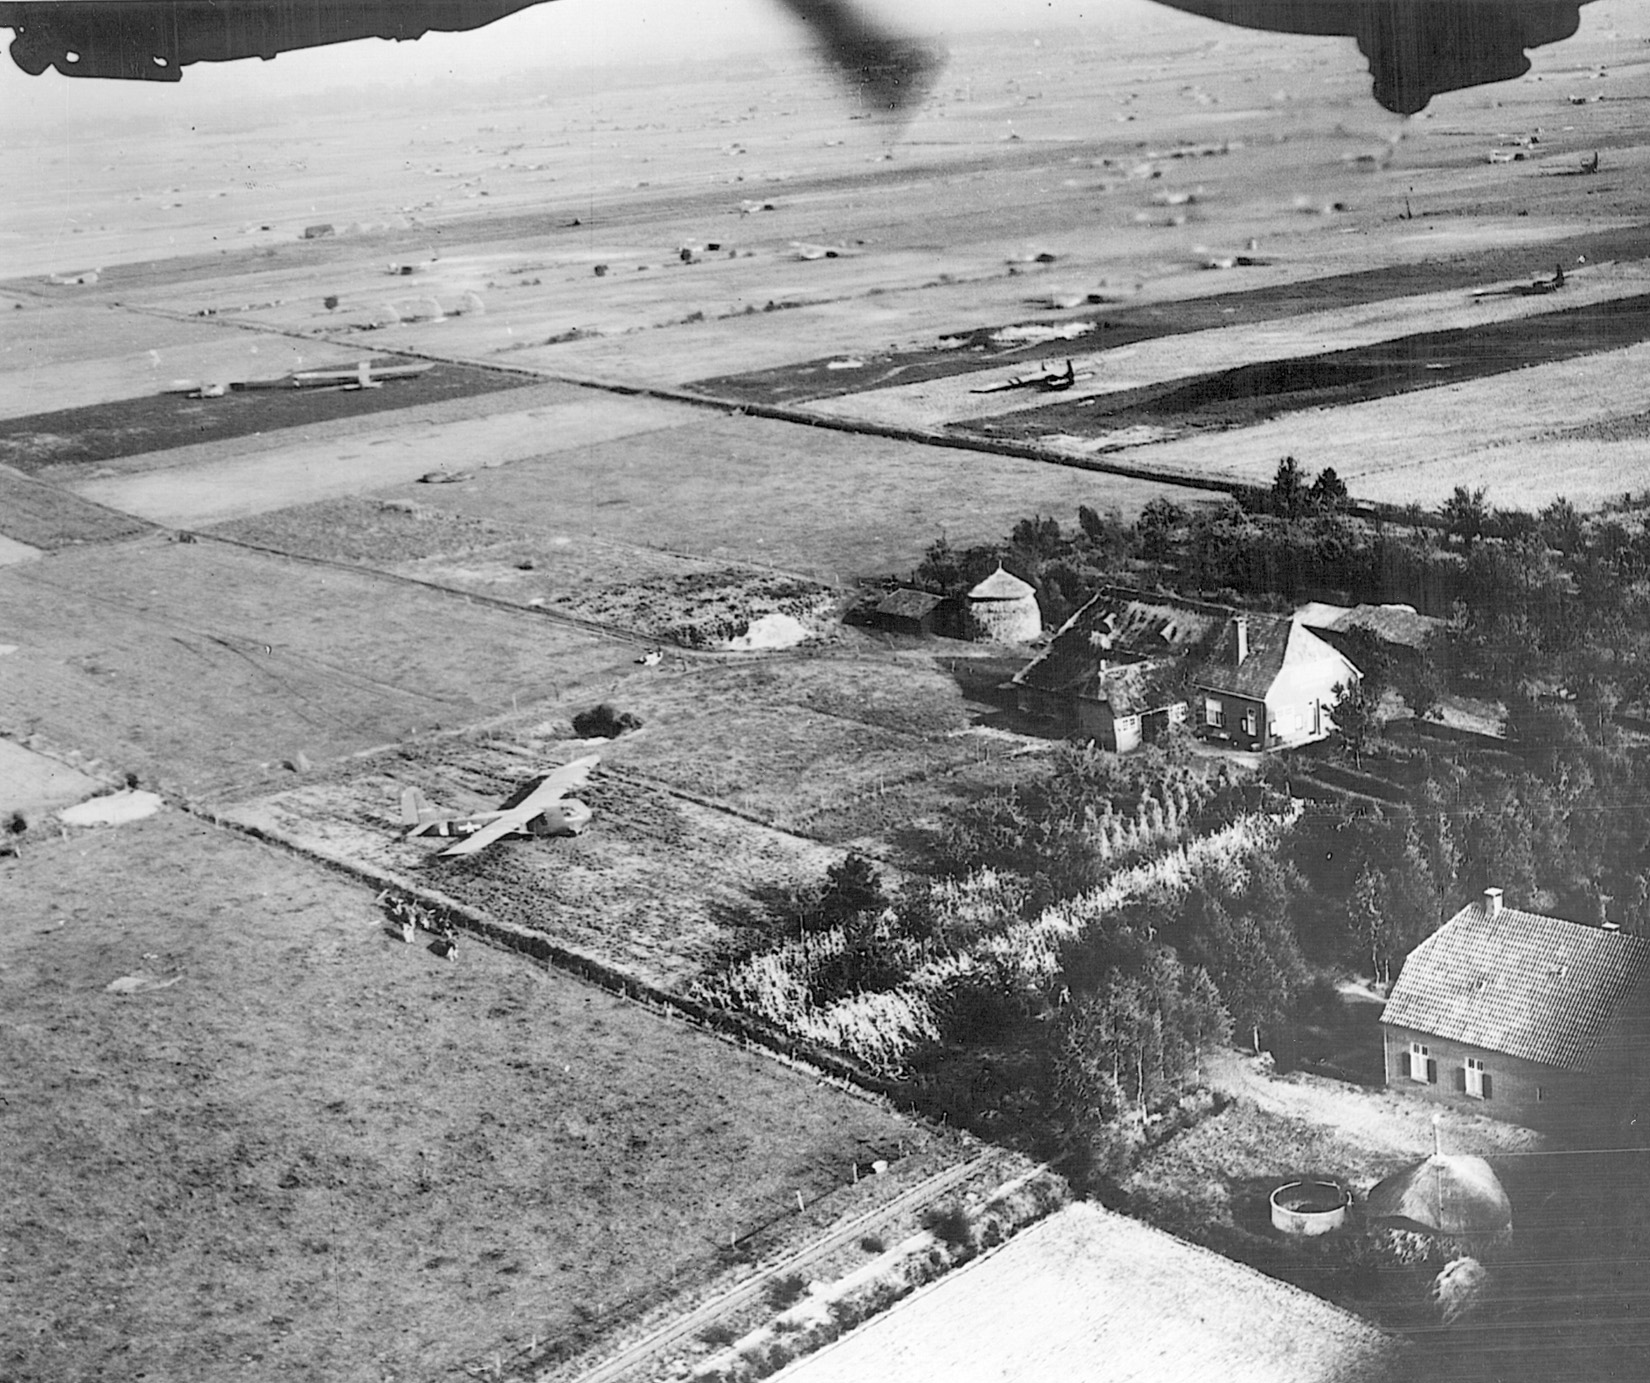 Consolidated B-24 Liberator bombers of the U.S. Army Air Forces fly over the Market-Garden glider landing zones in Holland while on their way to bomb a distant target on September 18, 1944.